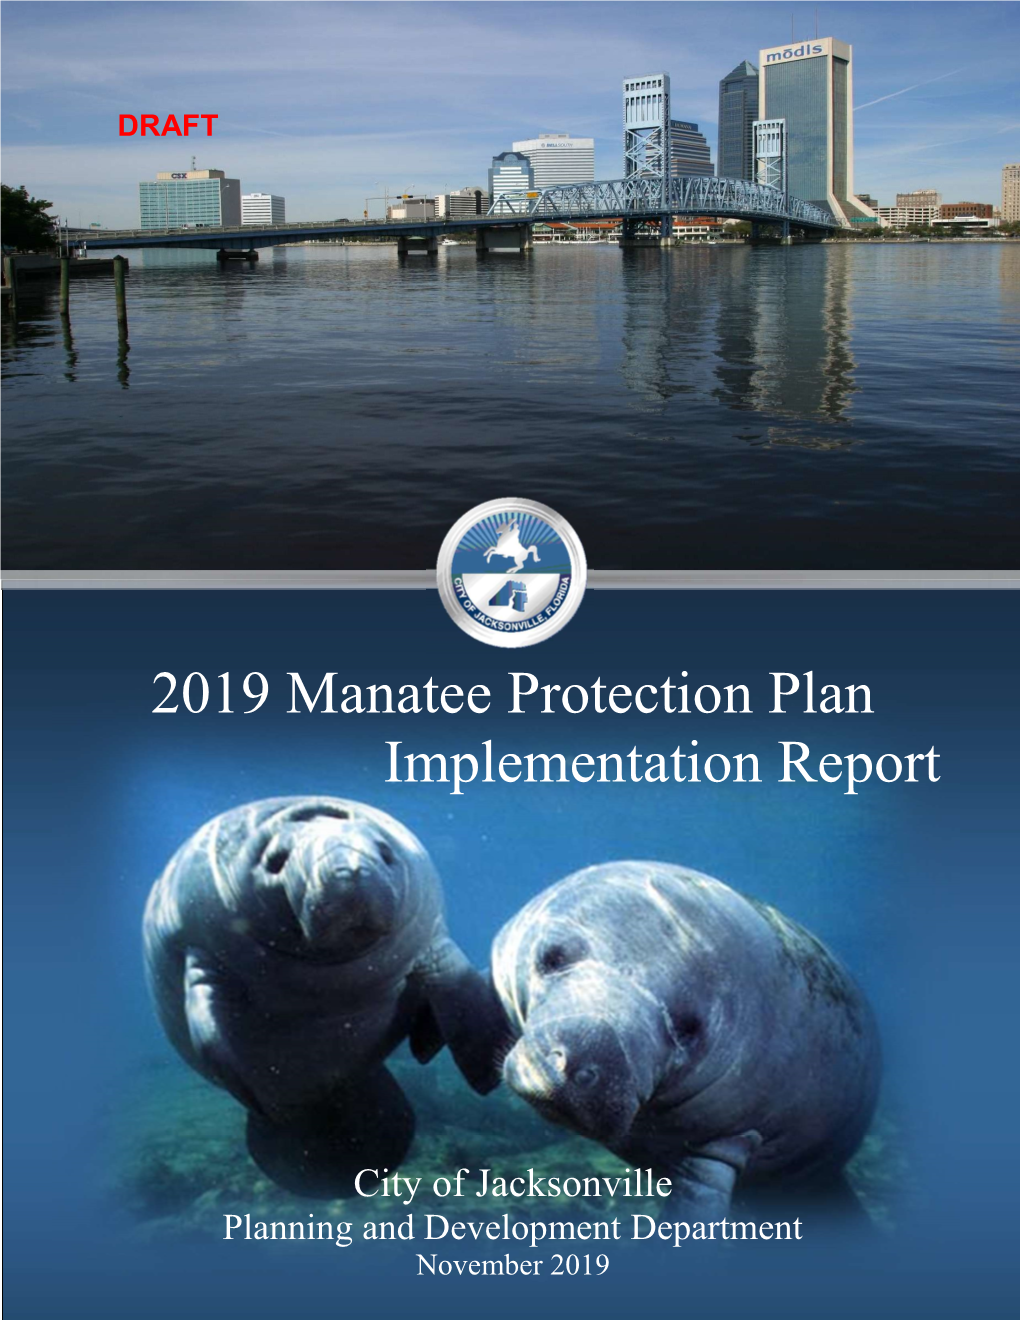 2019 Manatee Protection Plan Implementation Report That Reflects on the City of Jacksonville’S Efforts Towards Protecting Manatees in Duval County